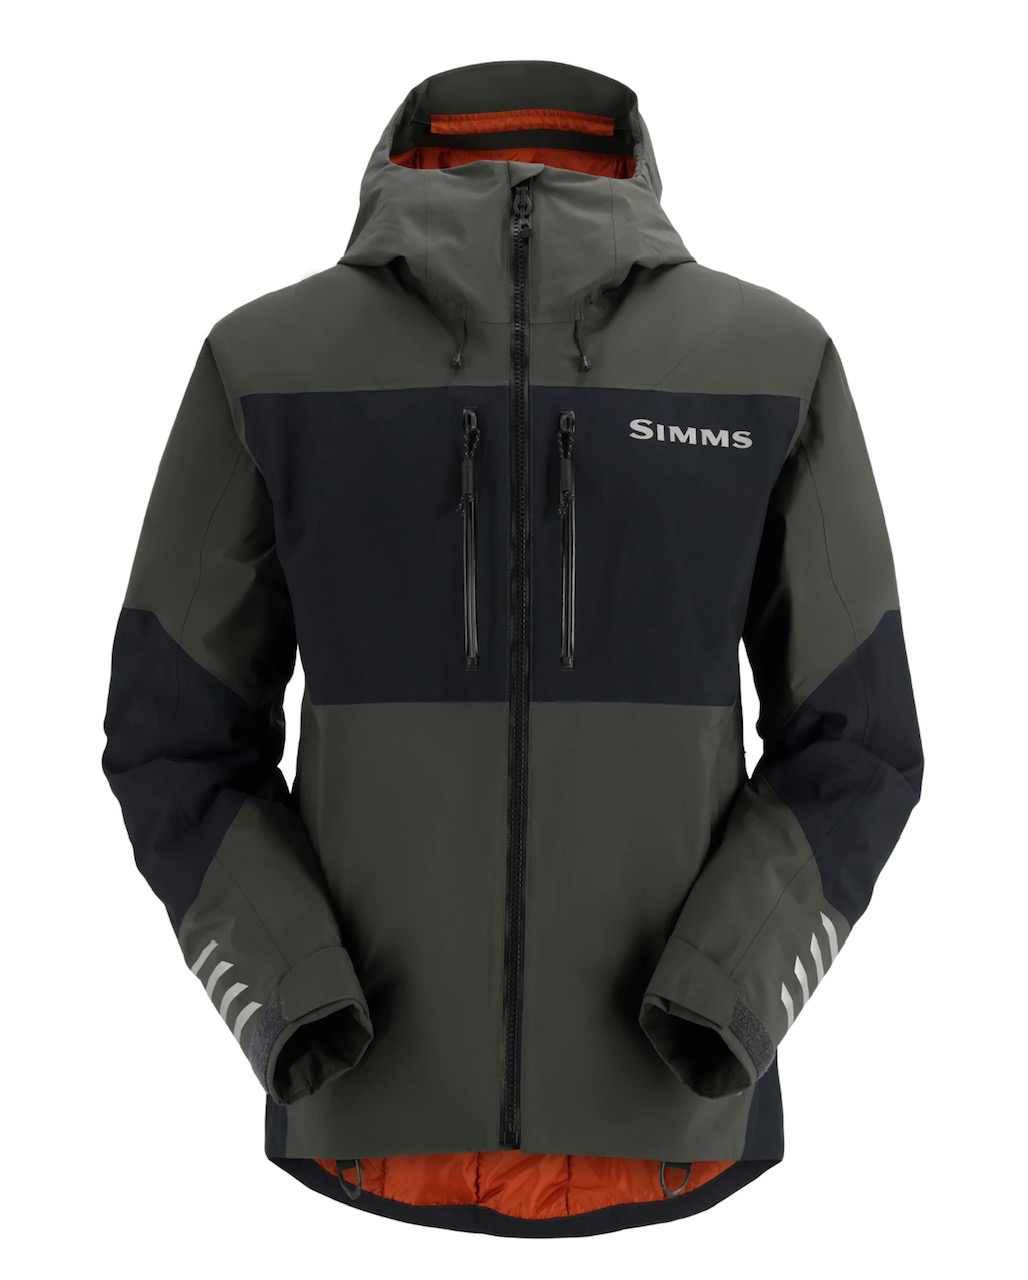 Simms M's Guide Insulated Jacket - Carbon - XL